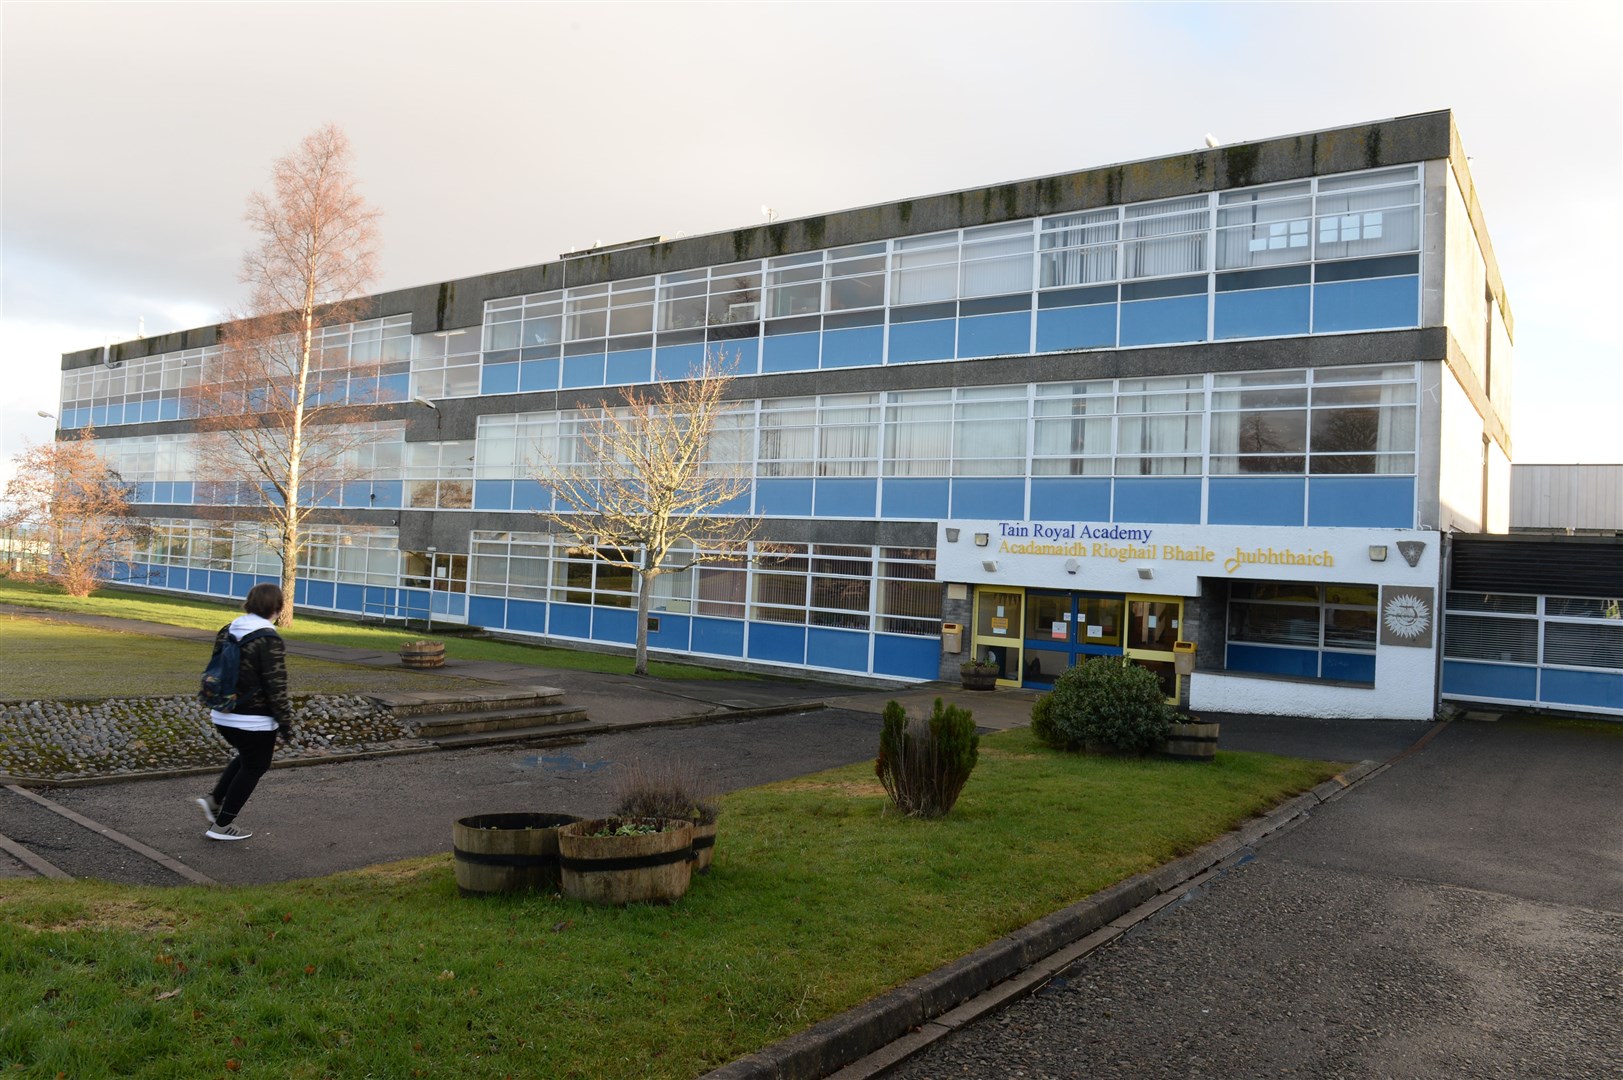 Tain Royal Academy is amongst the schools which will be replaced under the new plan.